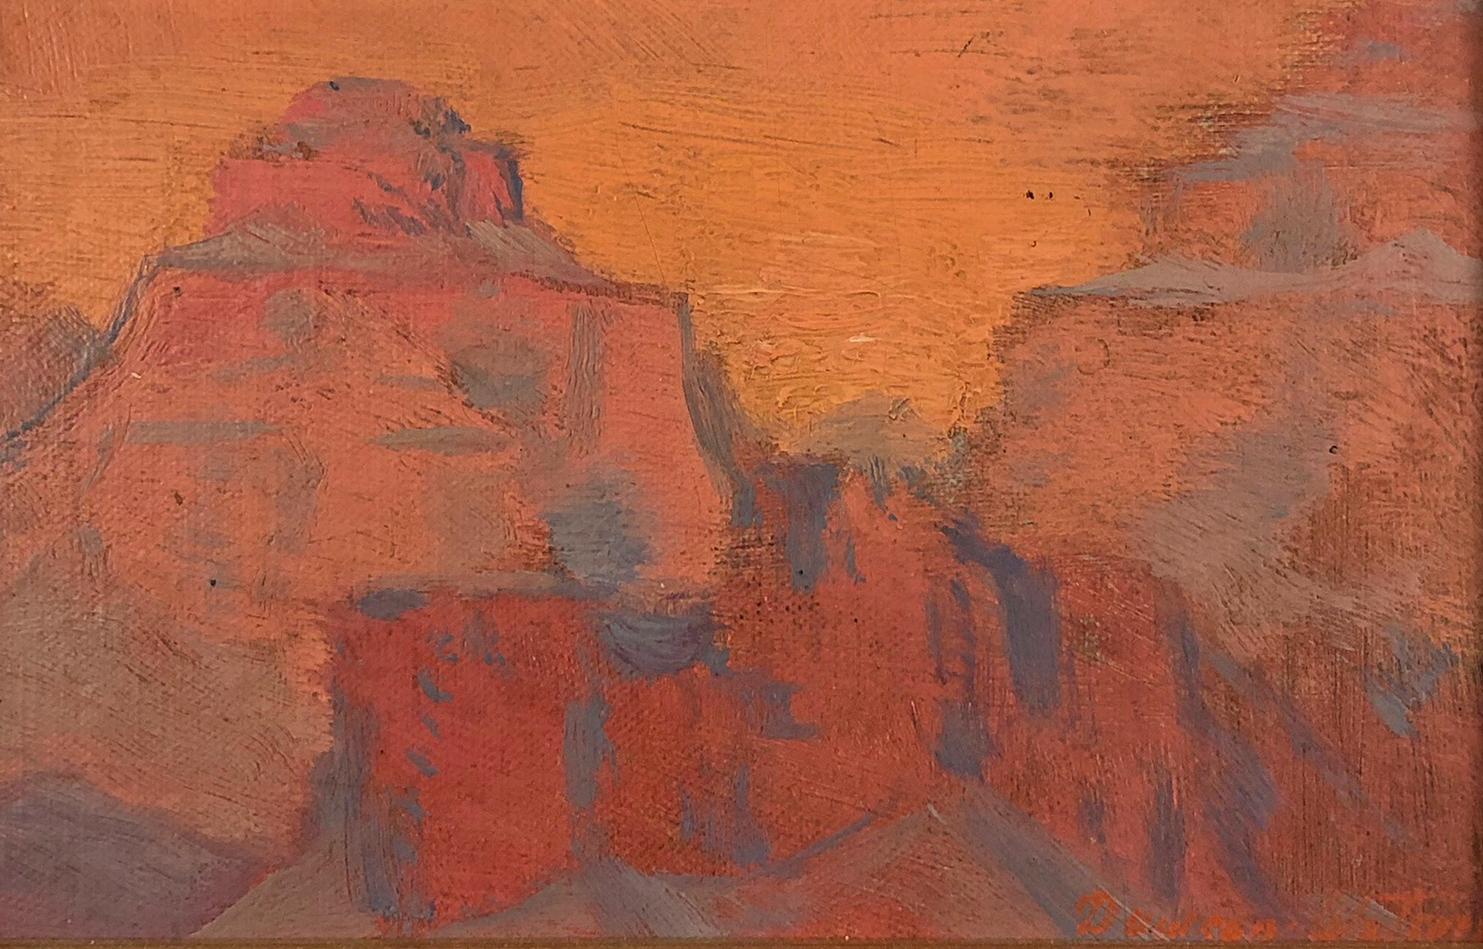 Bathed in Mysterious Light (Grand Canyon) - Painting by Dawson Dawson-Watson